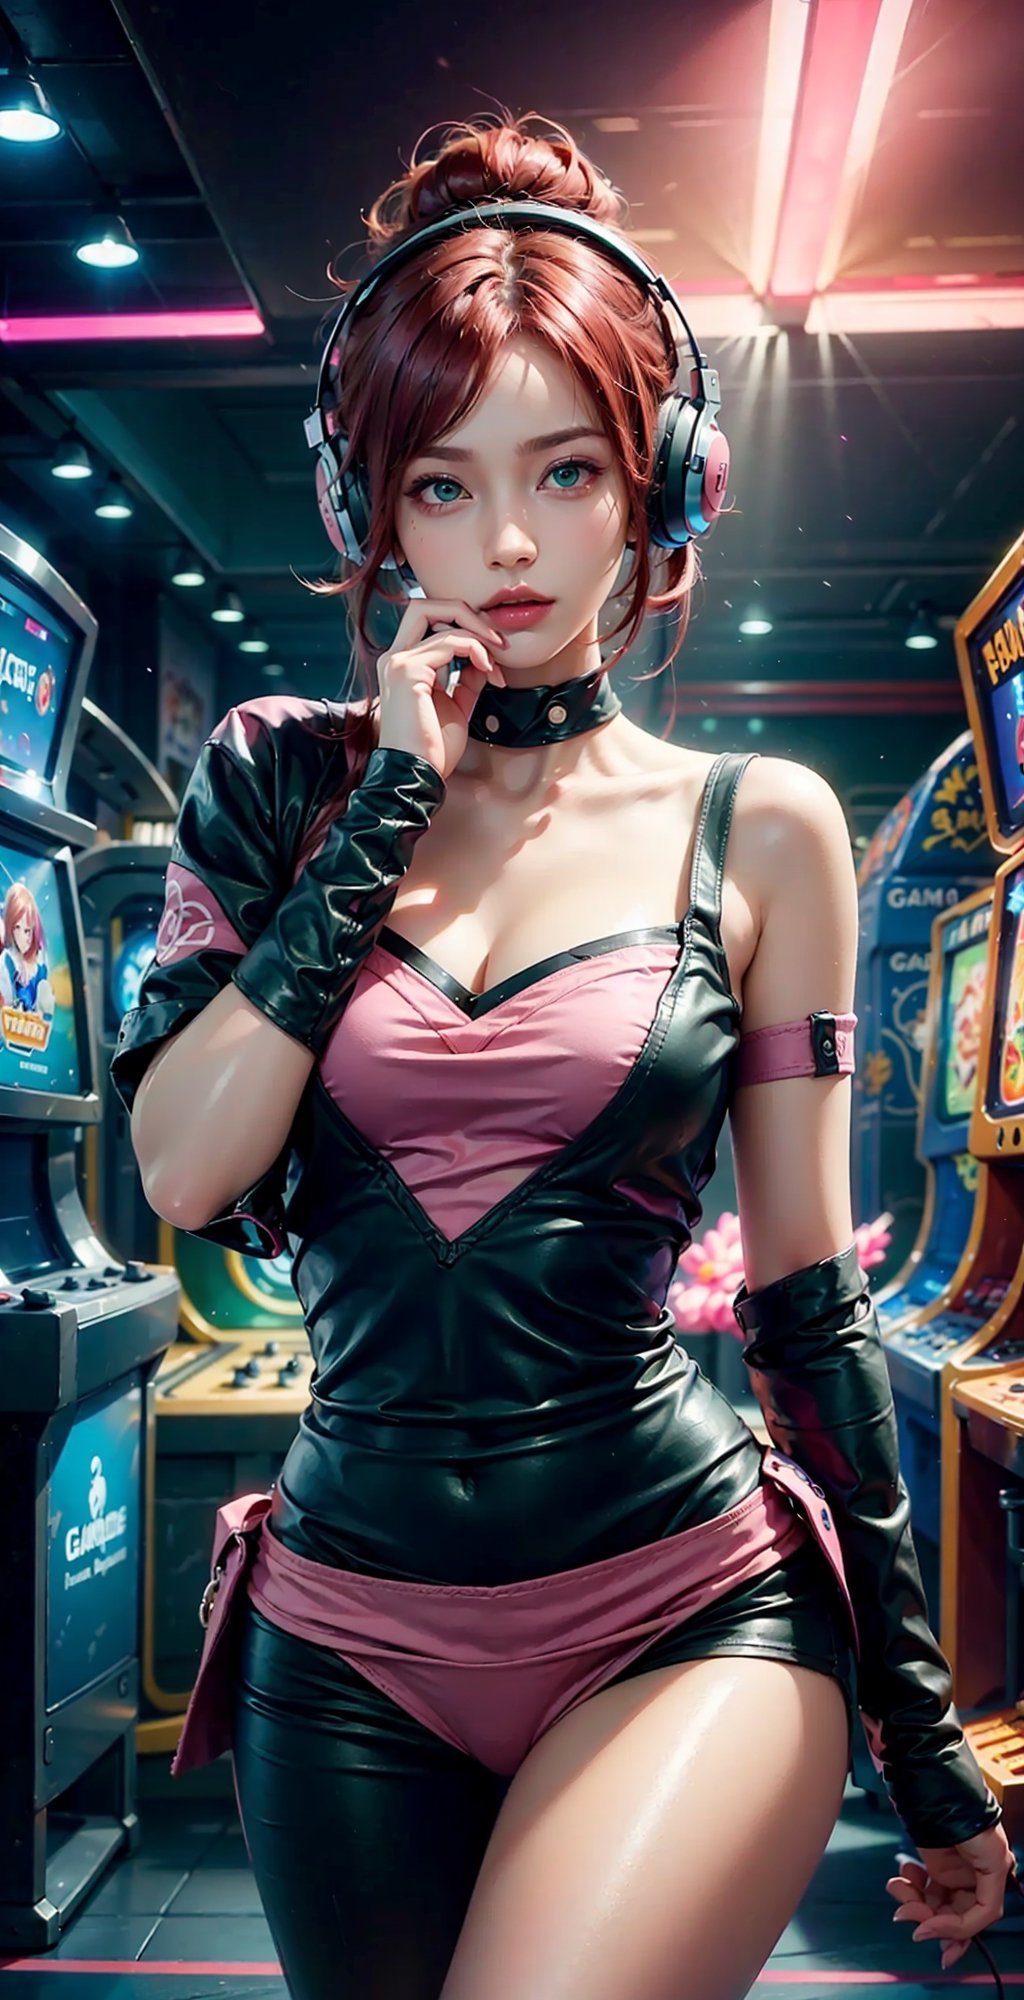 photography awards, masterpiece, red hair, green eyes, photorealistic, high resolution, soft light, pink vikini, 1women, solo, hips up, Gamer girl, Game center, arcade, shining skin, dynamic pose, bright, Game center background, high background detail, dim light, night, pink headphone